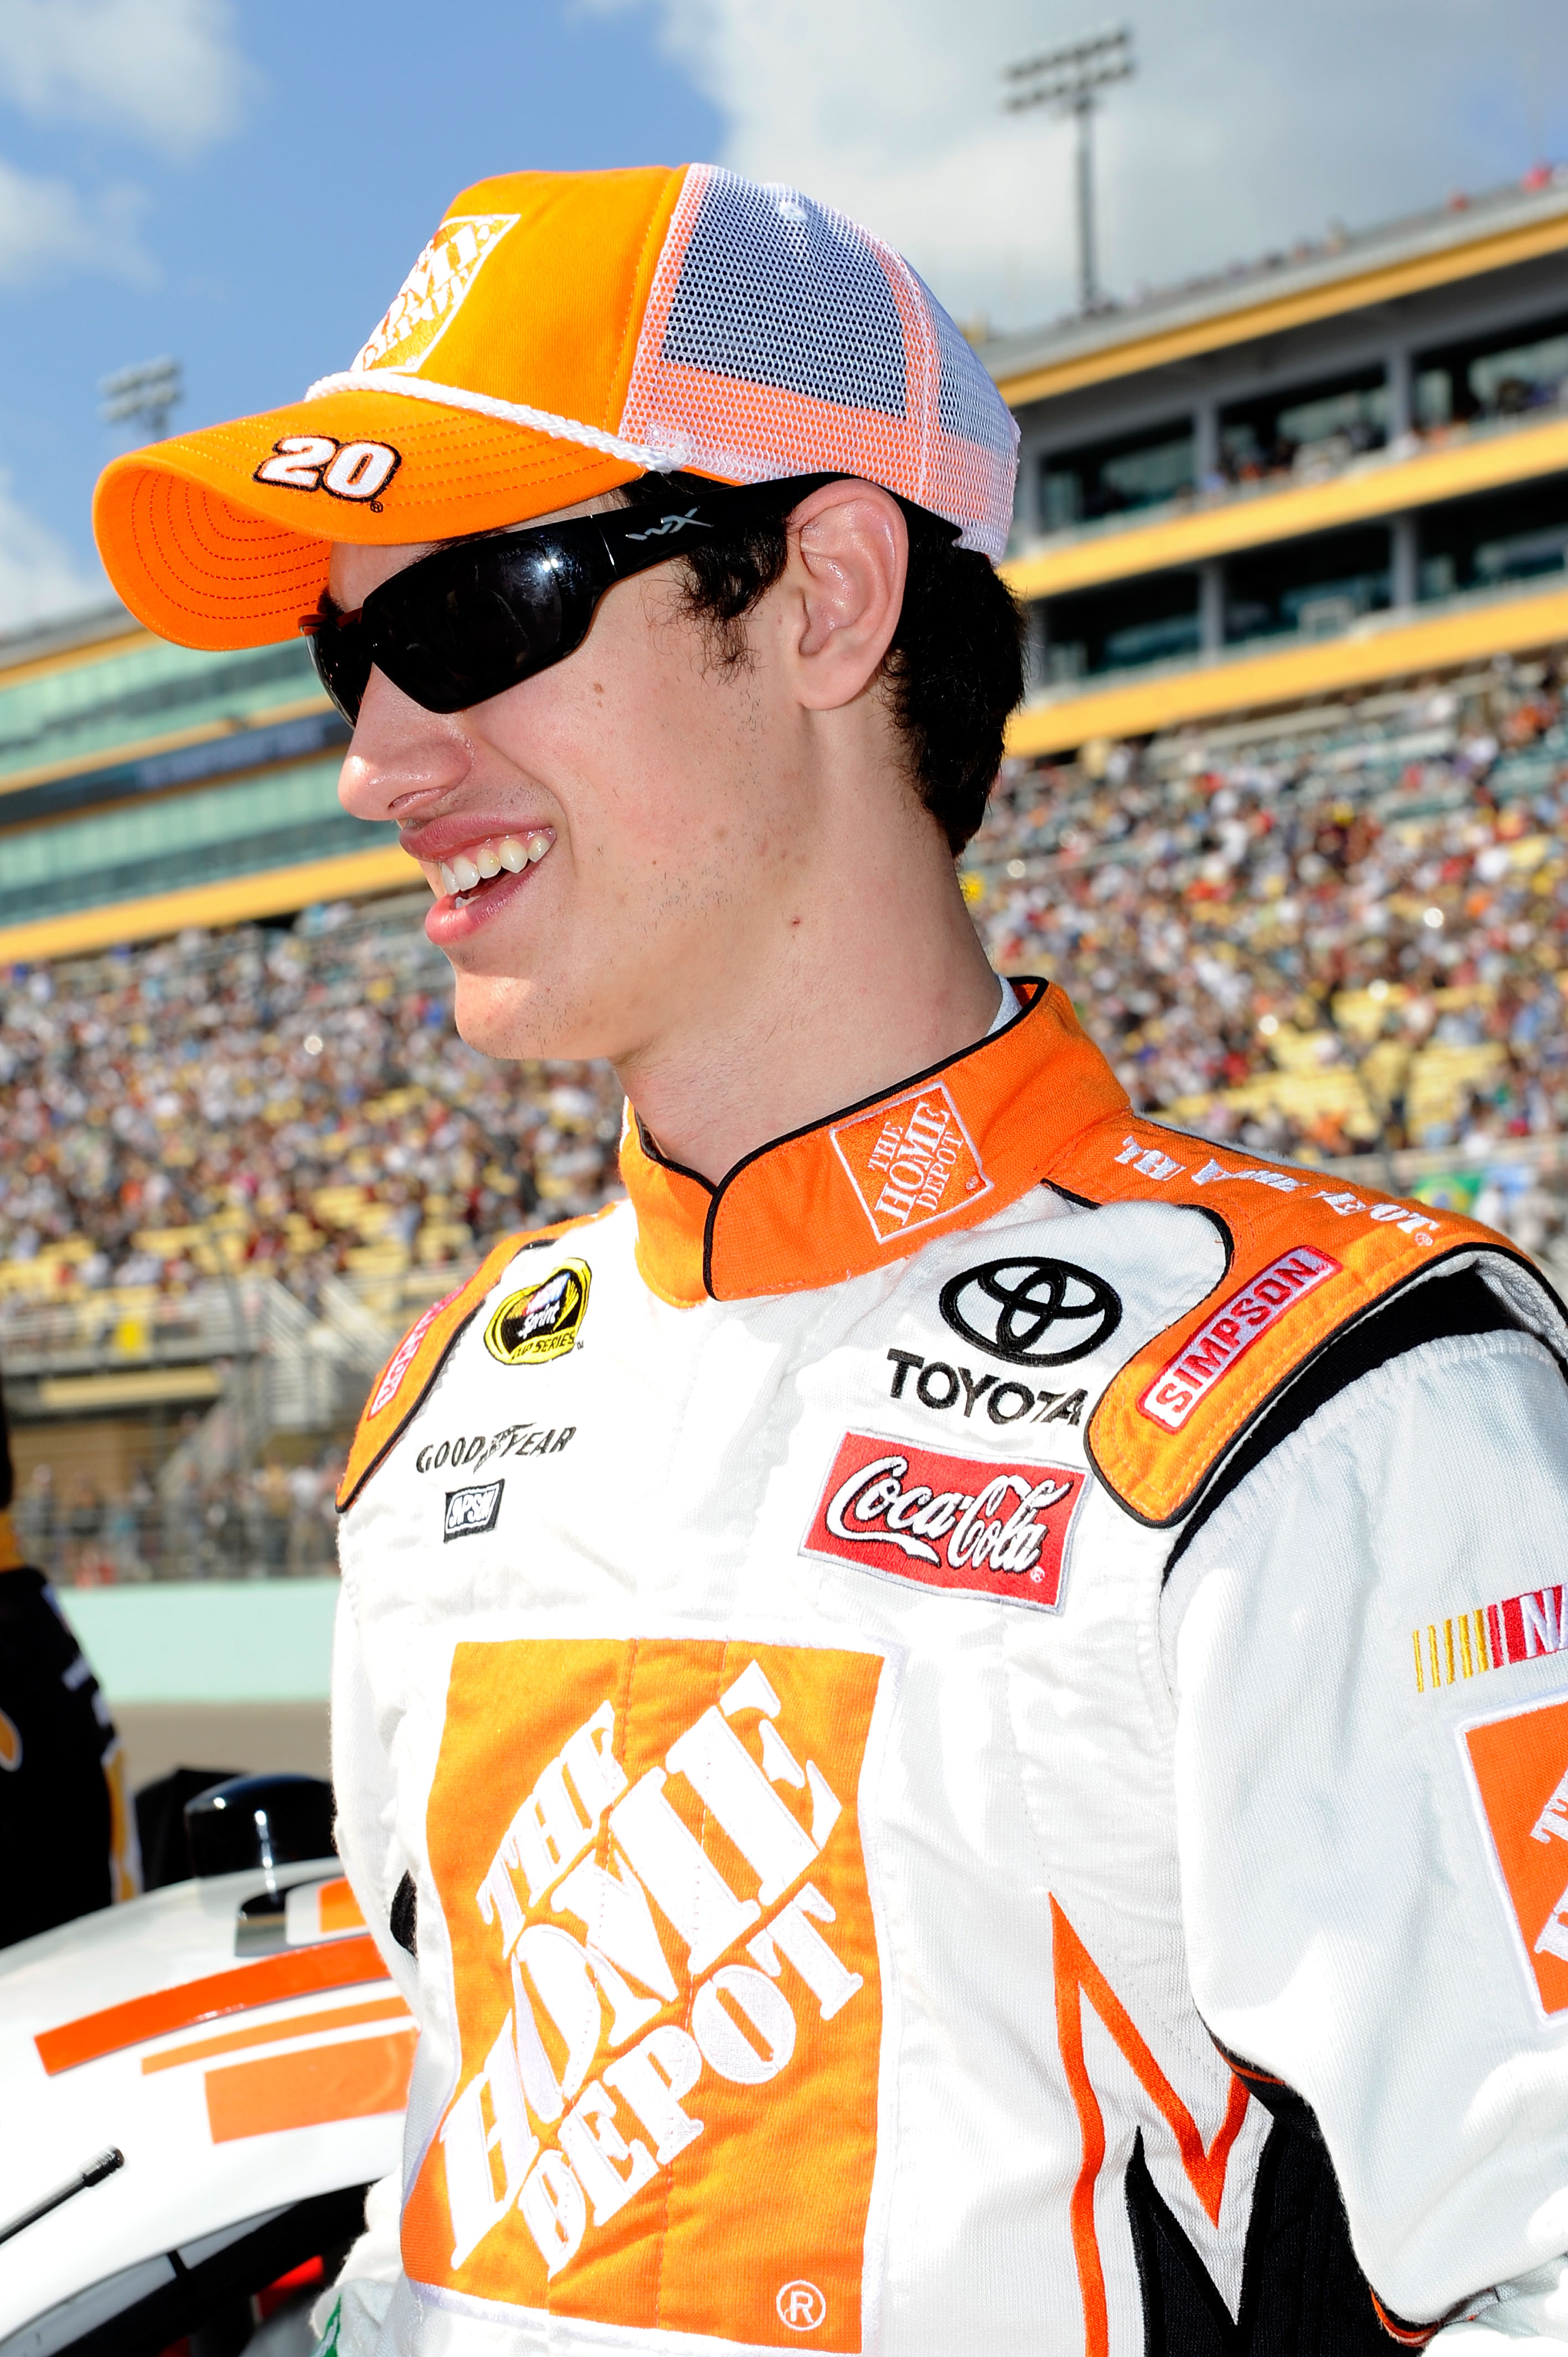 HOMESTEAD, FL - NOVEMBER 21:  Joey Logano, driver of the #20 Home Depot Toyota, stands on pit road prior to the NASCAR Sprint Cup Series Ford 400 at Homestead-Miami Speedway on November 21, 2010 in Homestead, Florida.  (Photo by John Harrelson/Getty Image